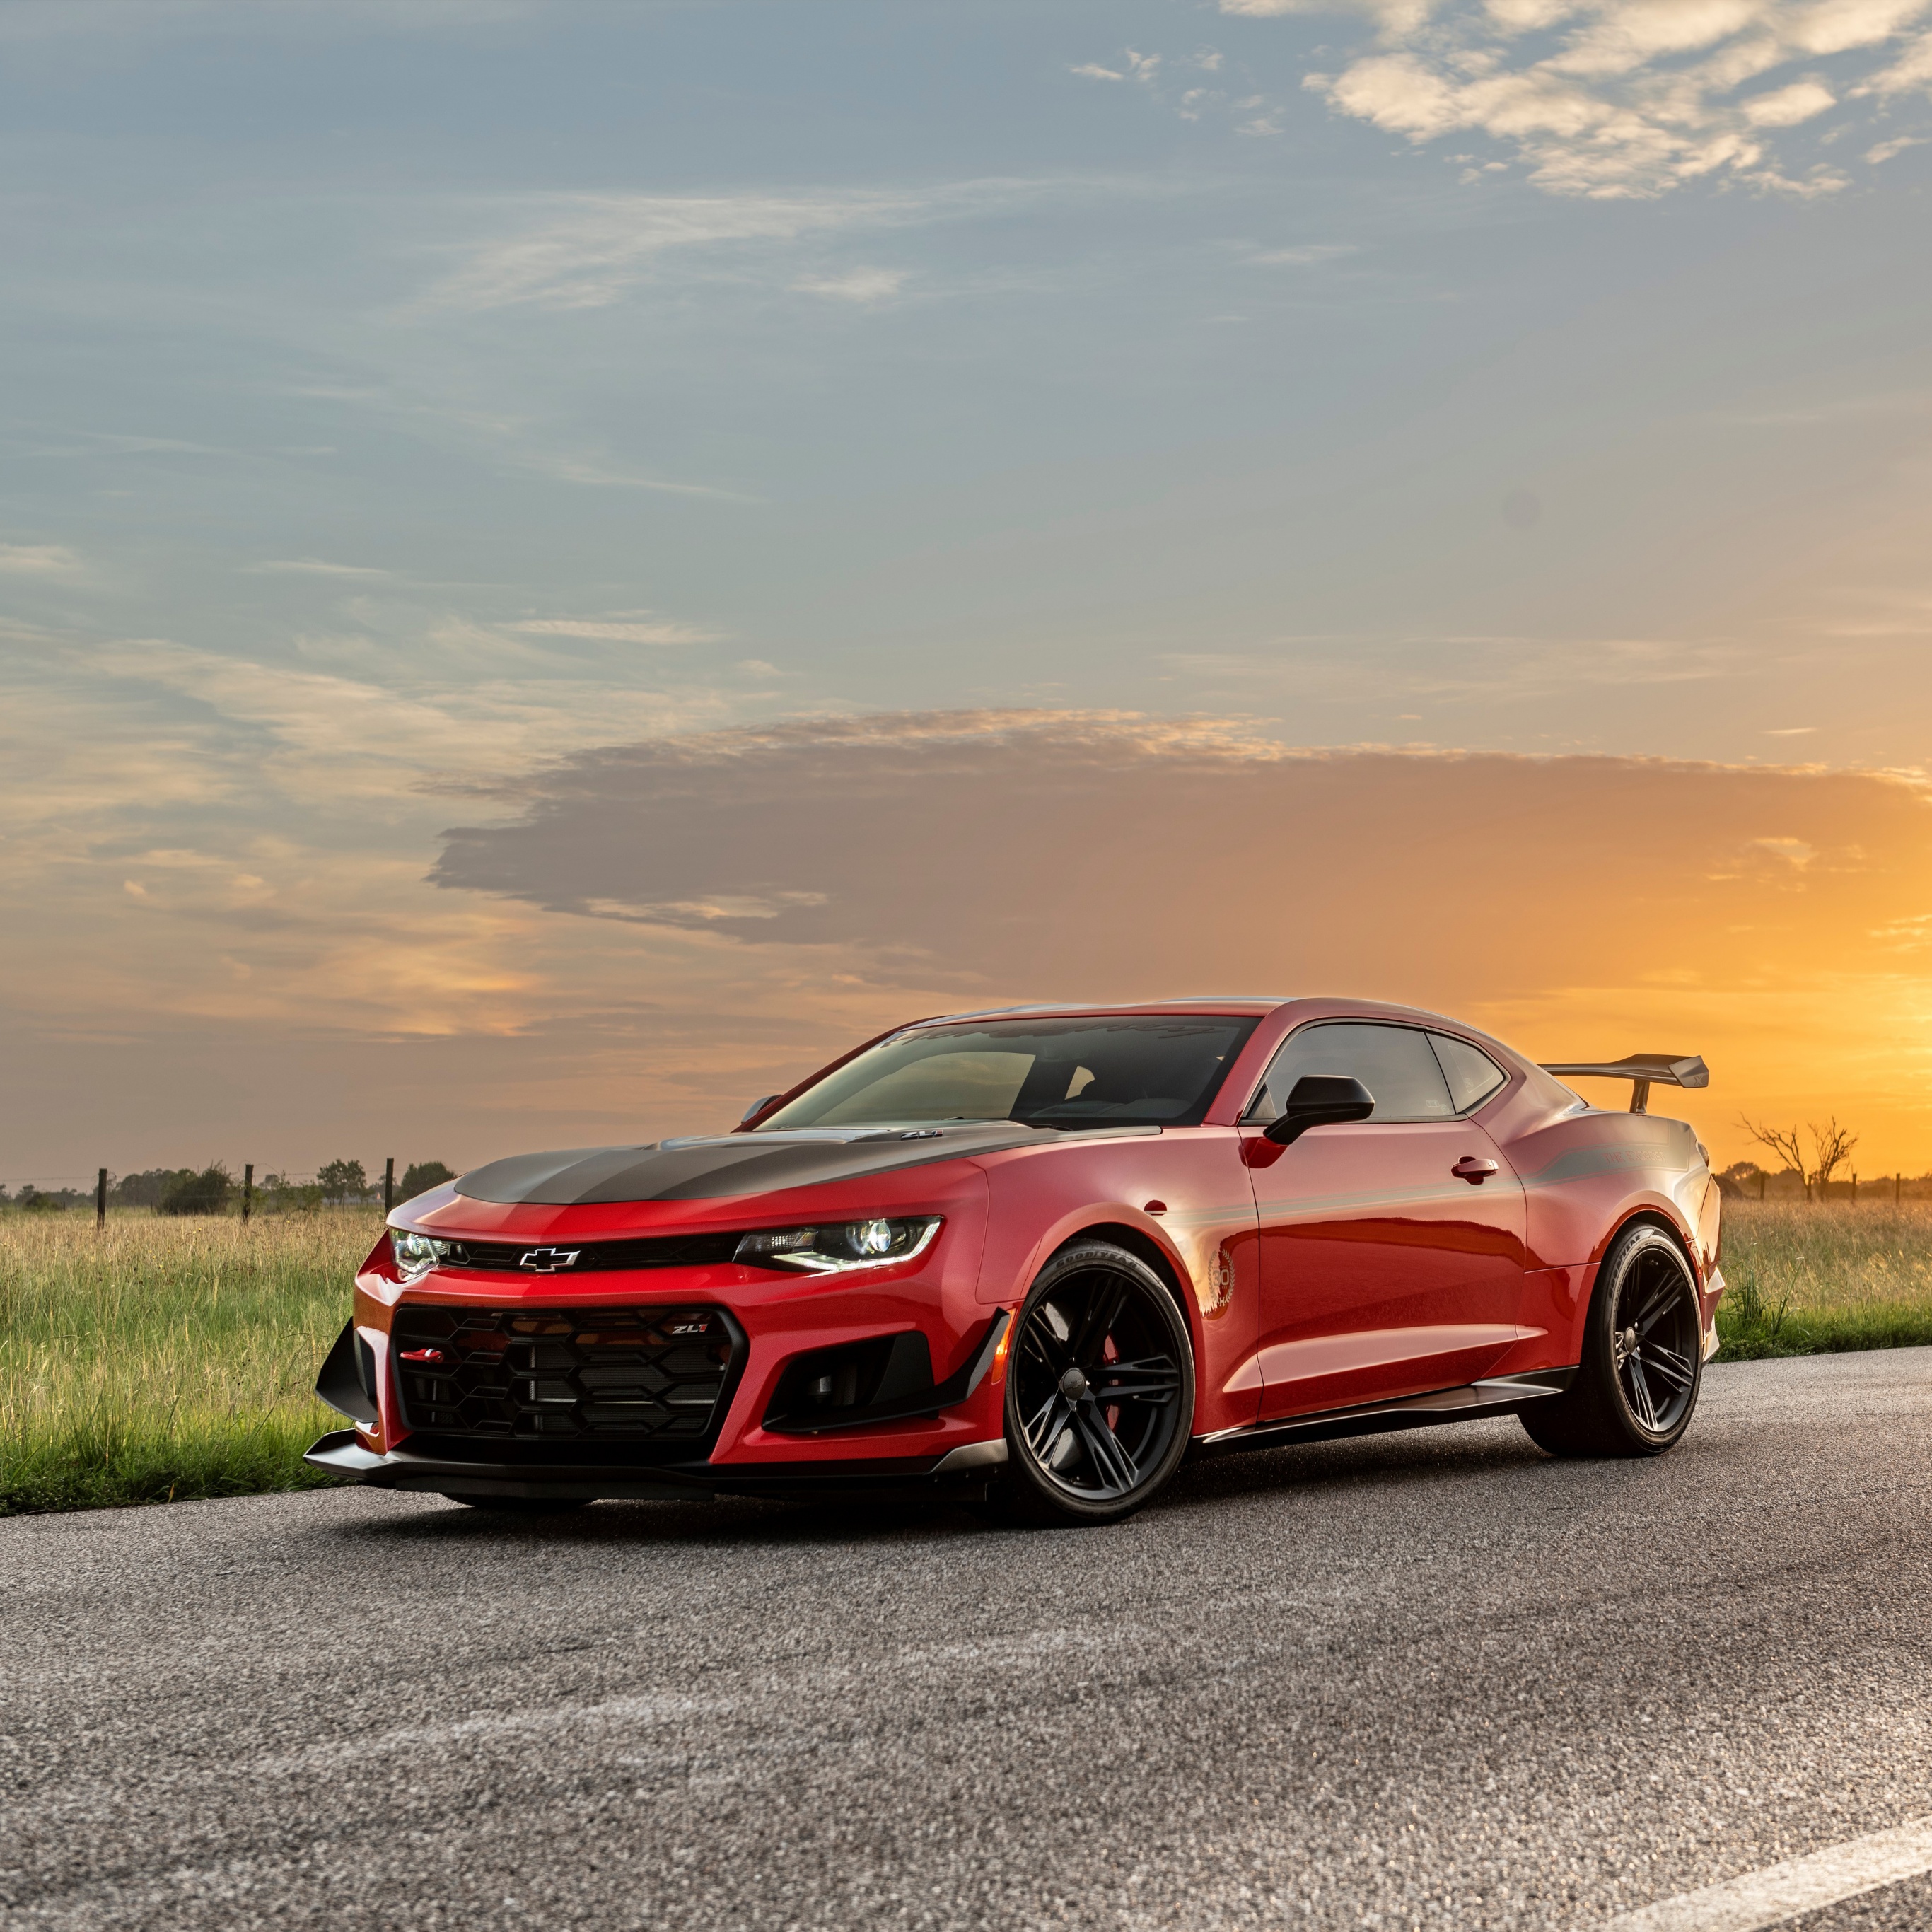 Hennessey Chevrolet Camaro Zl1 The Exorcist Wallpaper 4k Anniversary Edition Cars 6742